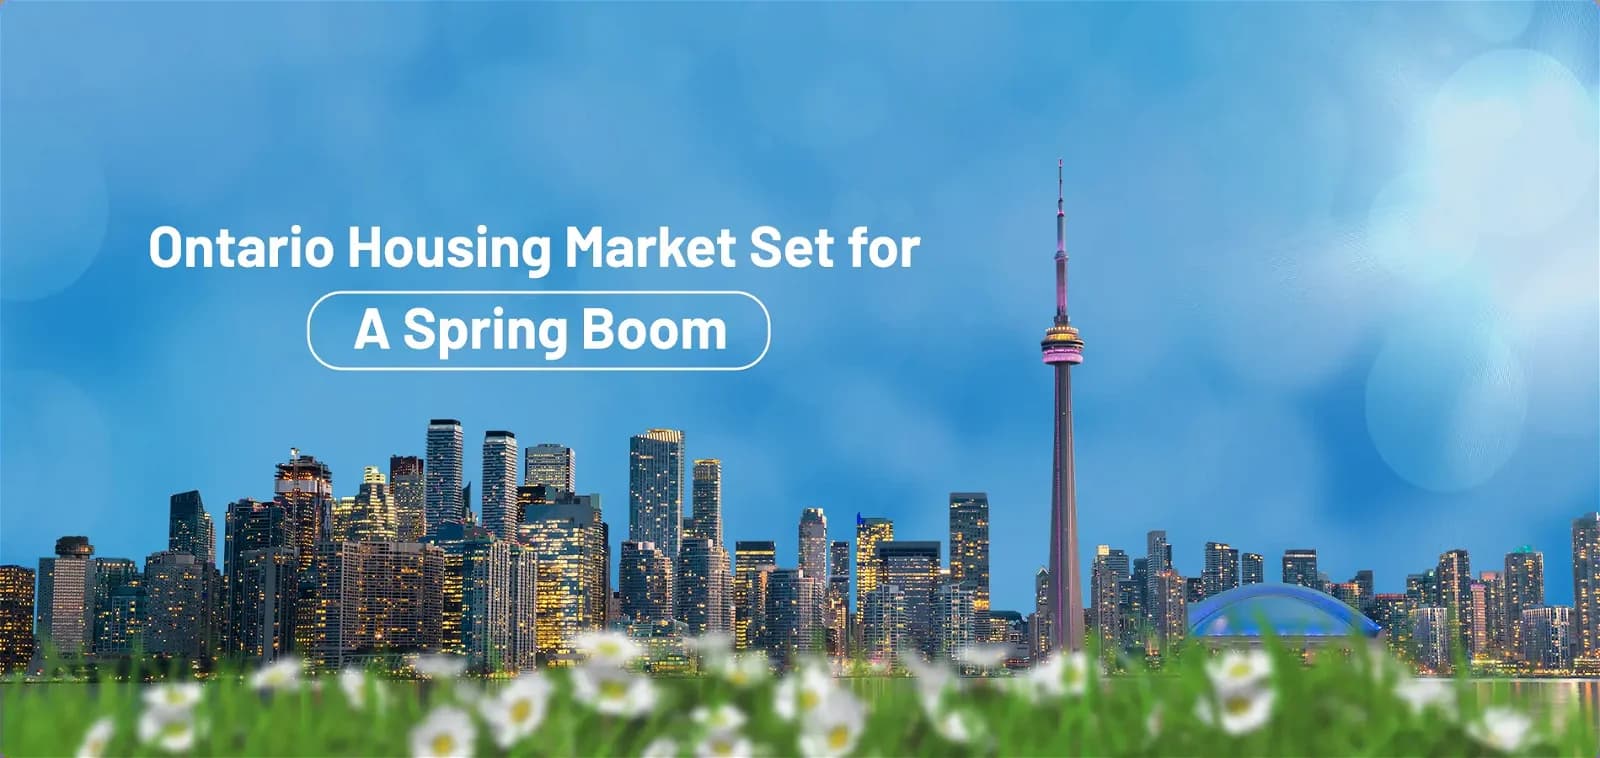 Ontario Housing Market Set for a Spring Boom: Prices Rise, Economy Stabilizes, and Activity Heats Up